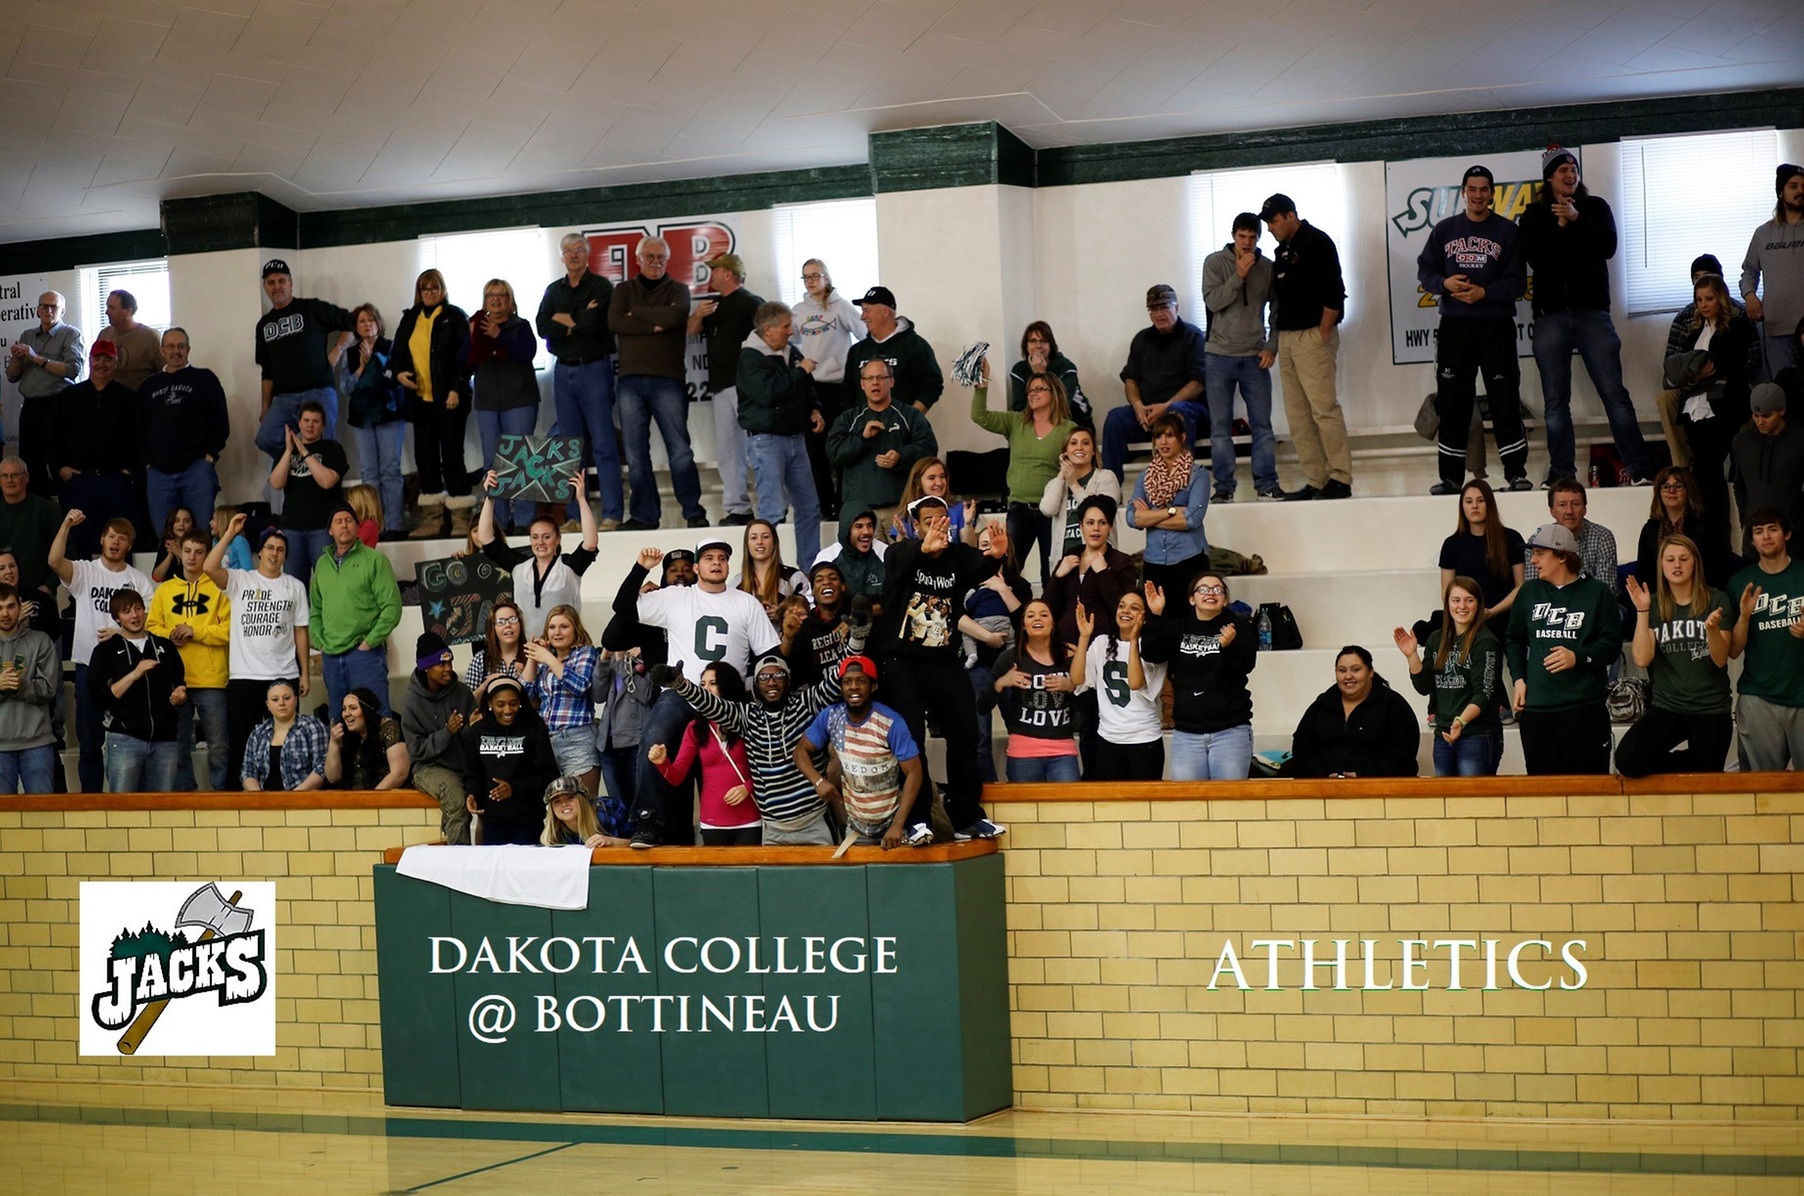 Your support helps out DCB Athletics tremendously